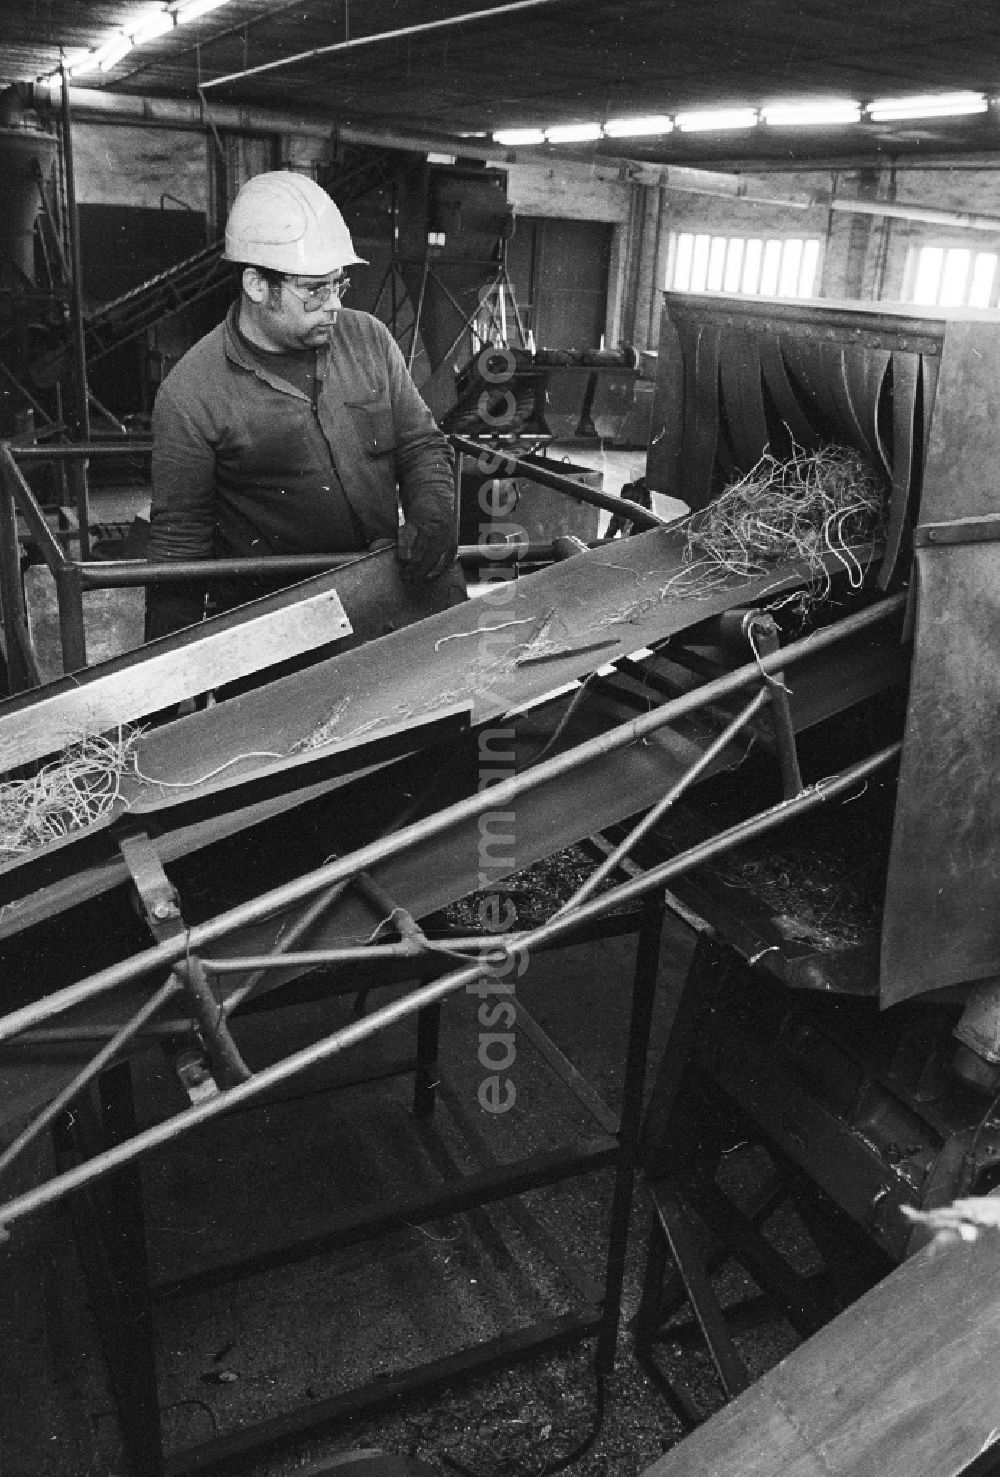 GDR image archive: Berlin - Valuable material separation in the combine VEB secondary raw material capture (SERO) in Berlin, the former capital of the GDR, German democratic republic. An employee separates valuable metals about a conveyor belt run